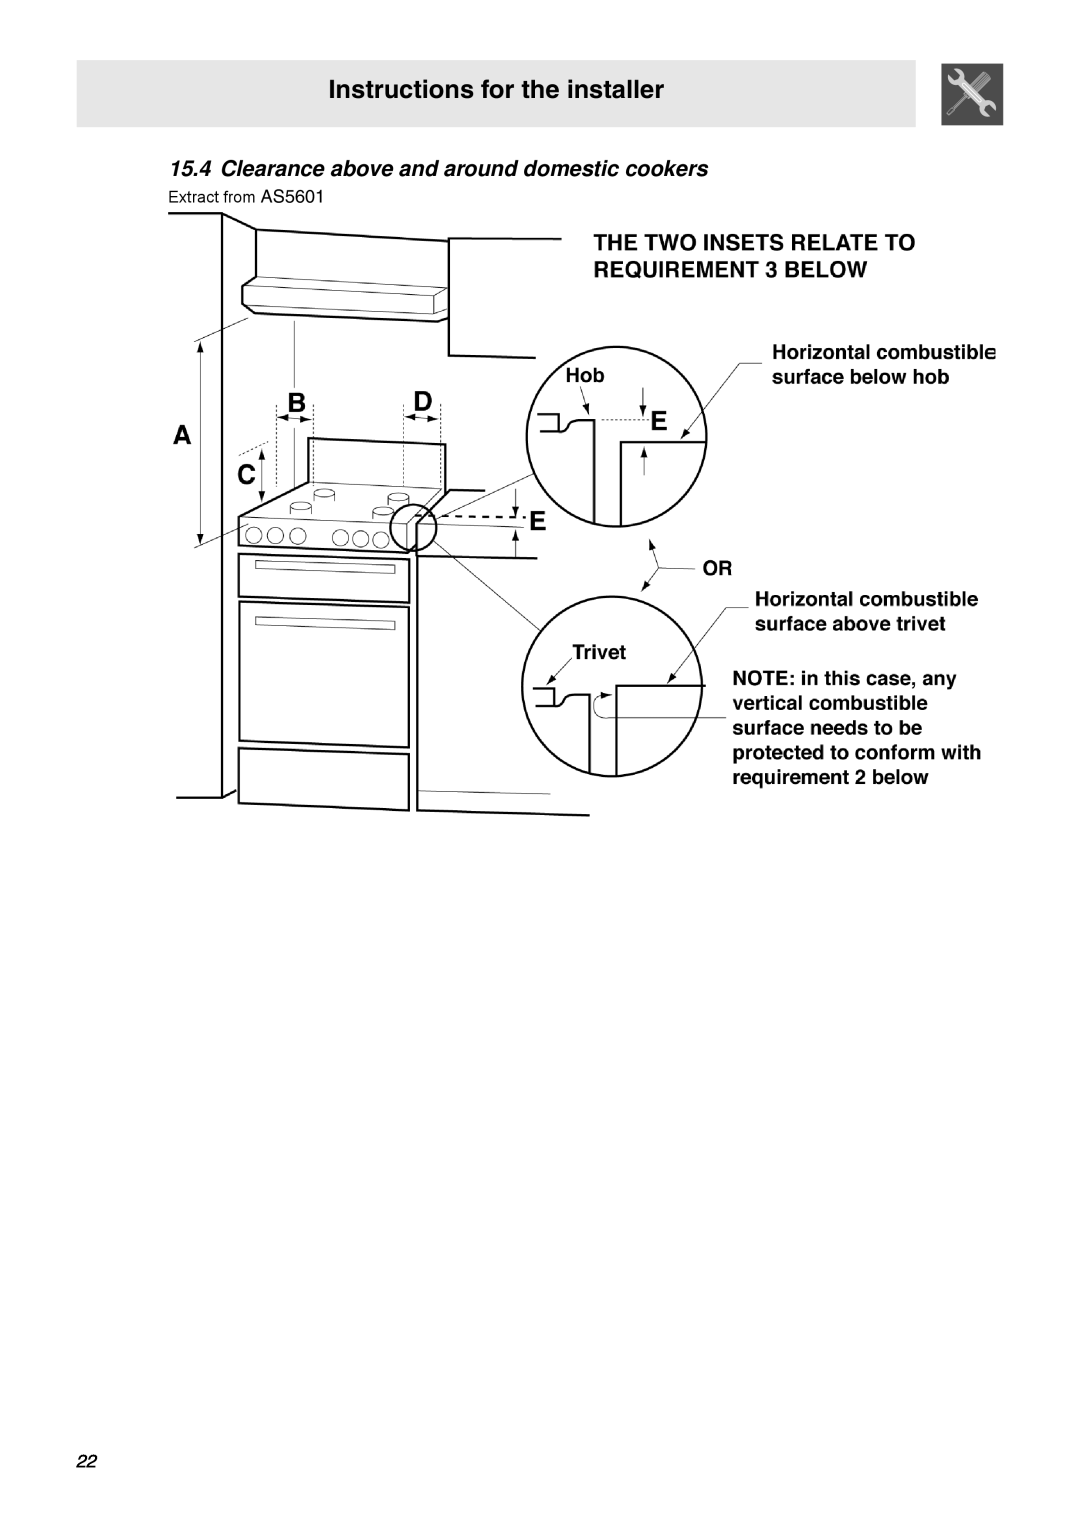 Smeg SNZ106VML manual Clearance above and around domestic cookers, Instructions for the installer, Extract from AS5601 